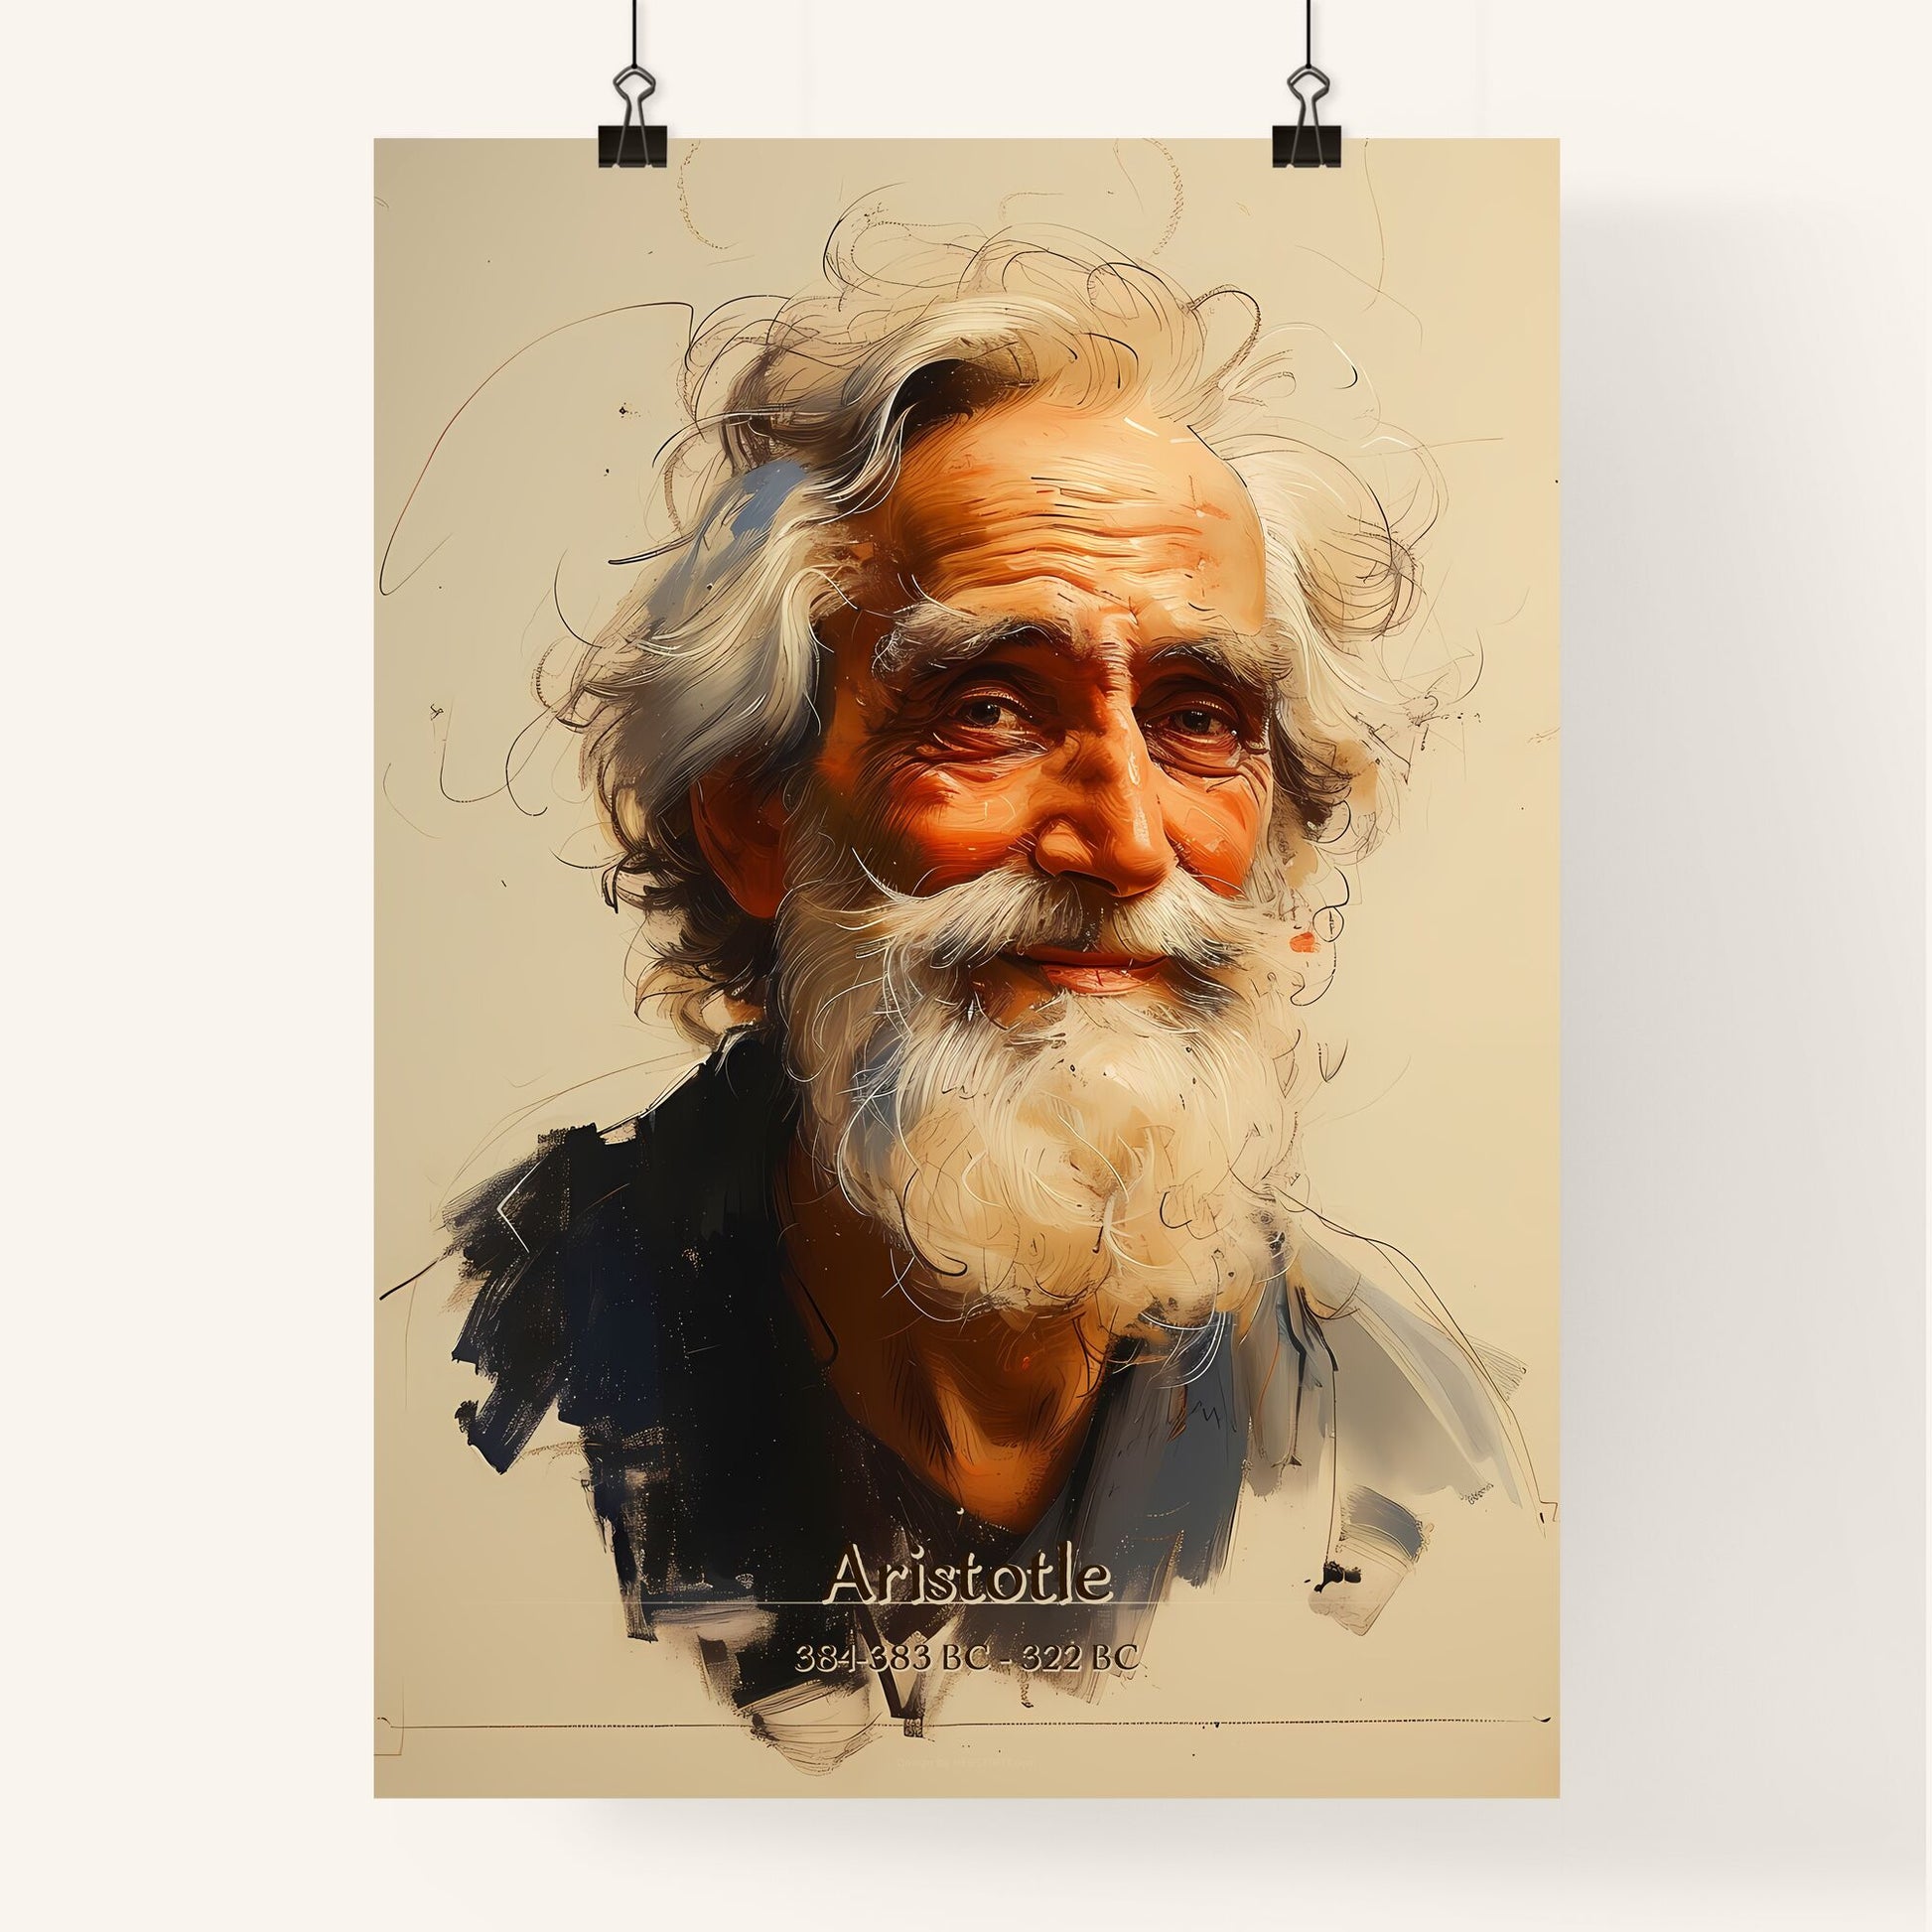 Aristotle, 384-383 BC - 322 BC, A Poster of a painting of a man with a beard Default Title